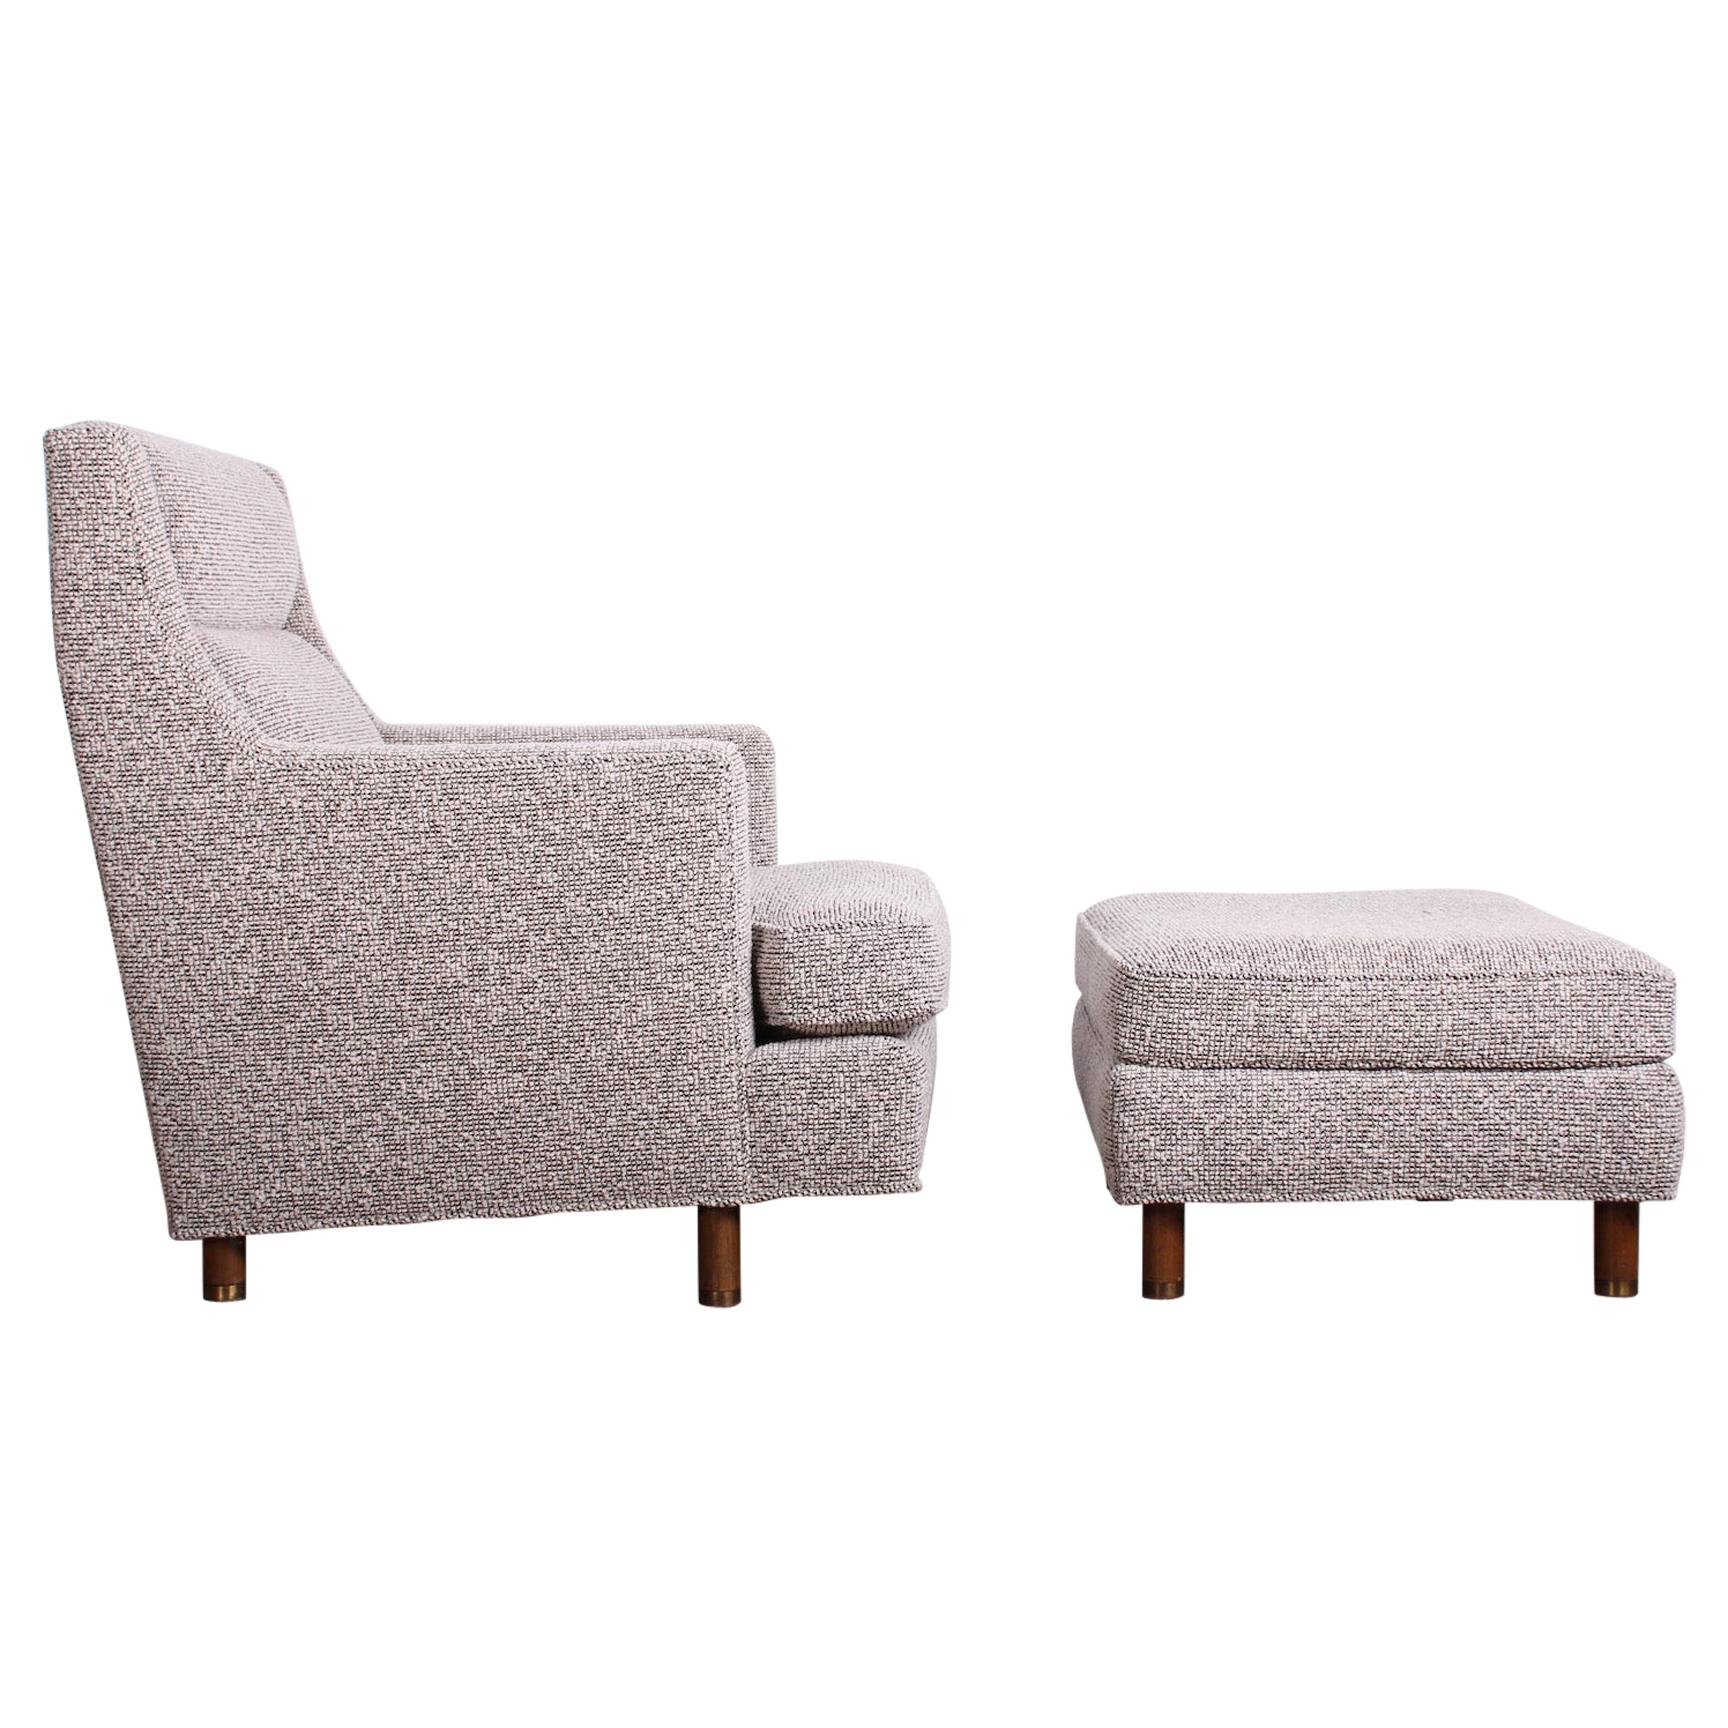 Edward Wormley Lounge Chair and Ottoman